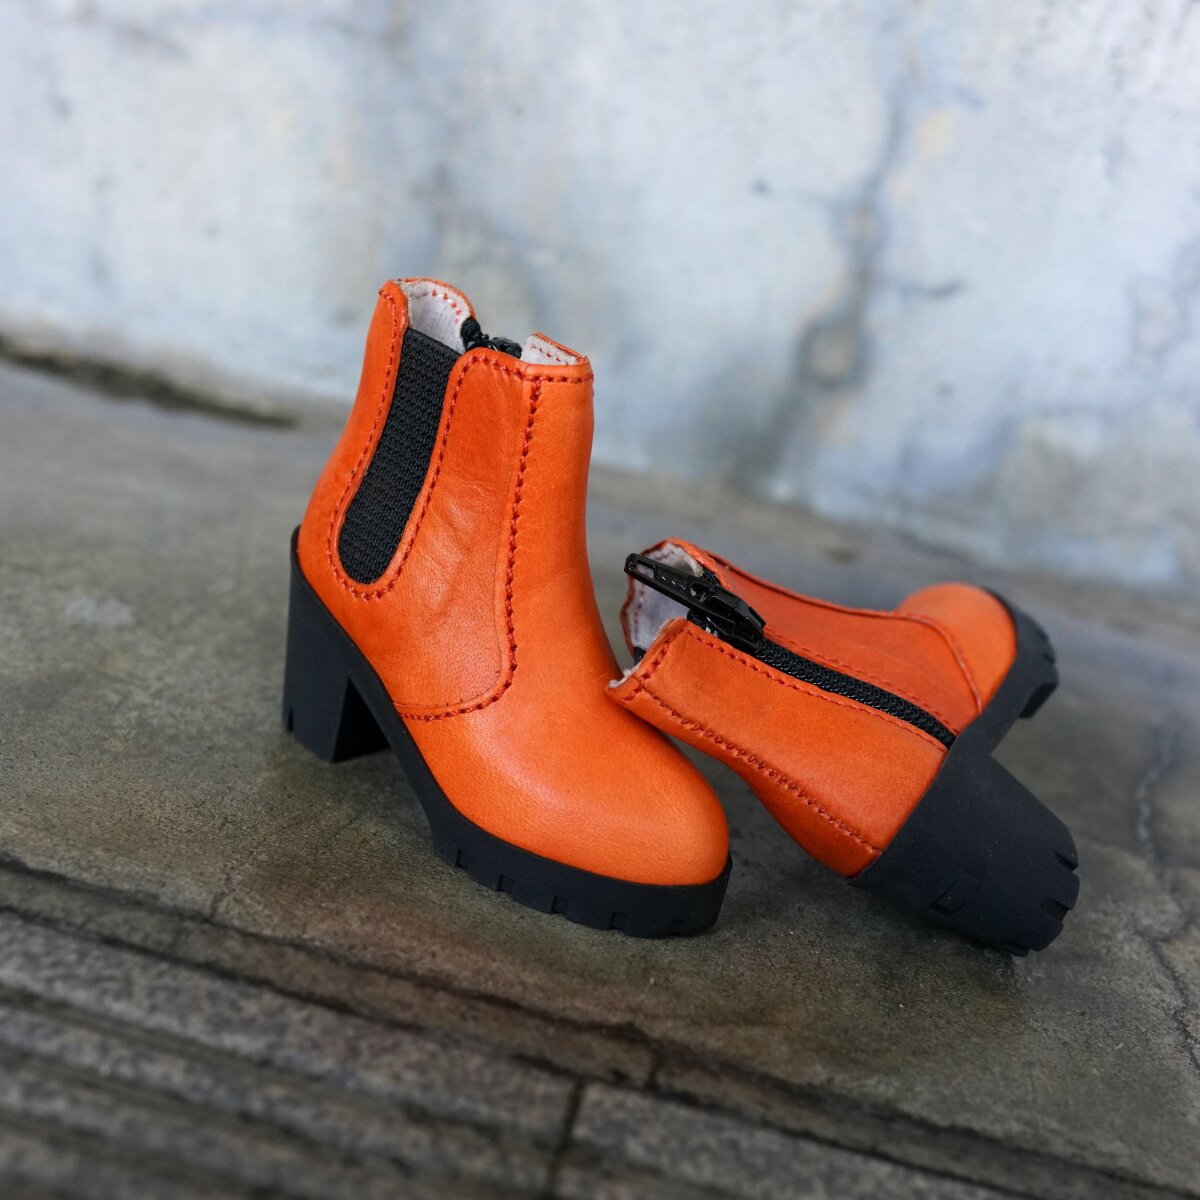 Chelsea Boots, 155,00